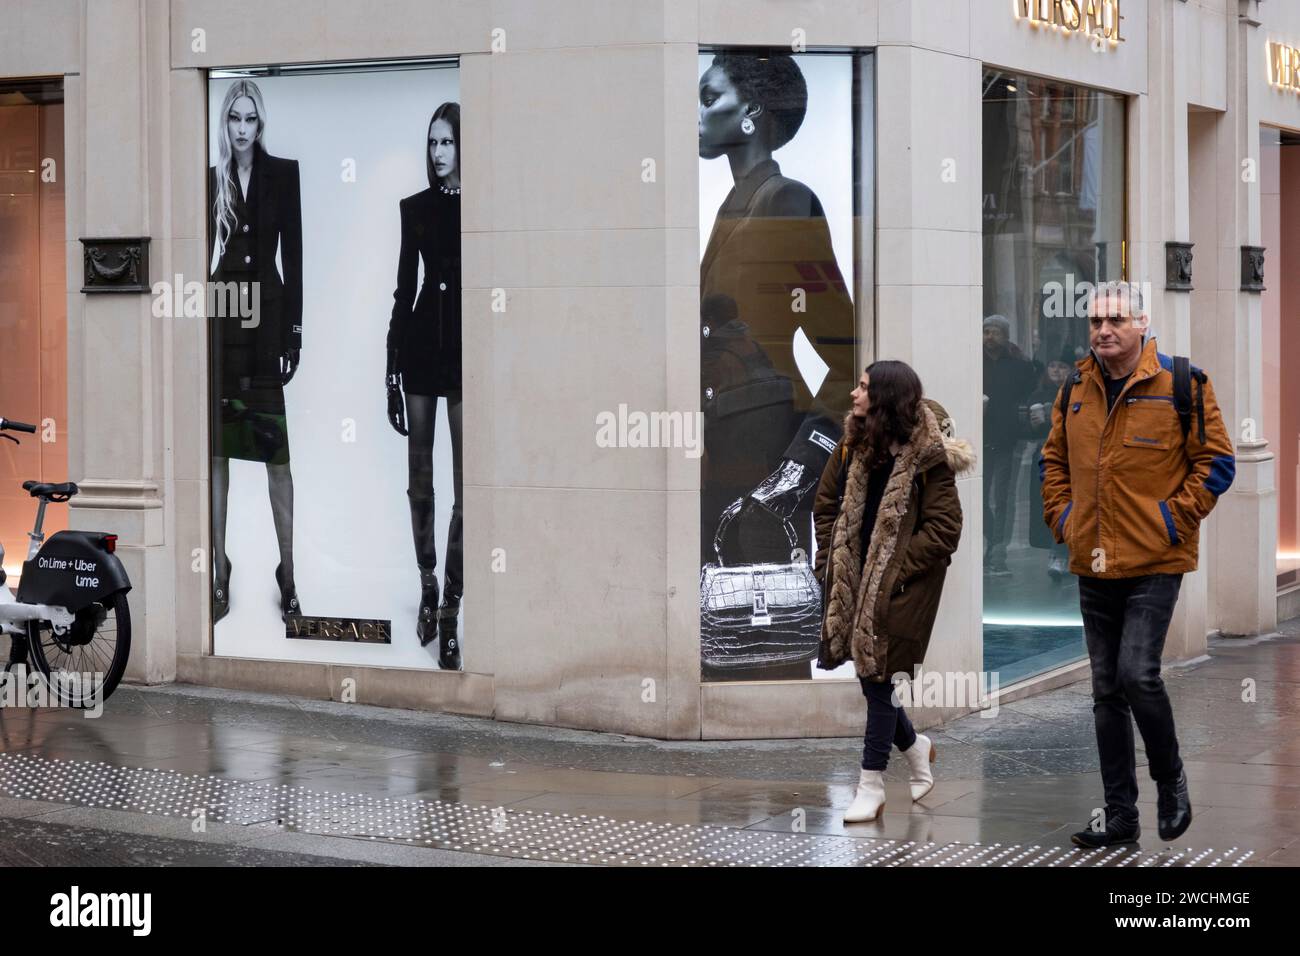 People interact with figures of models outside the Versace store on Bond Street on 4th December 2023 in London, United Kingdom. Bond Street is one of the principal streets in the West End shopping district and is very upmarket. It has been a fashionable shopping street since the 18th century. The rich and wealthy shop here mostly for high end fashion and jewellery. Stock Photo